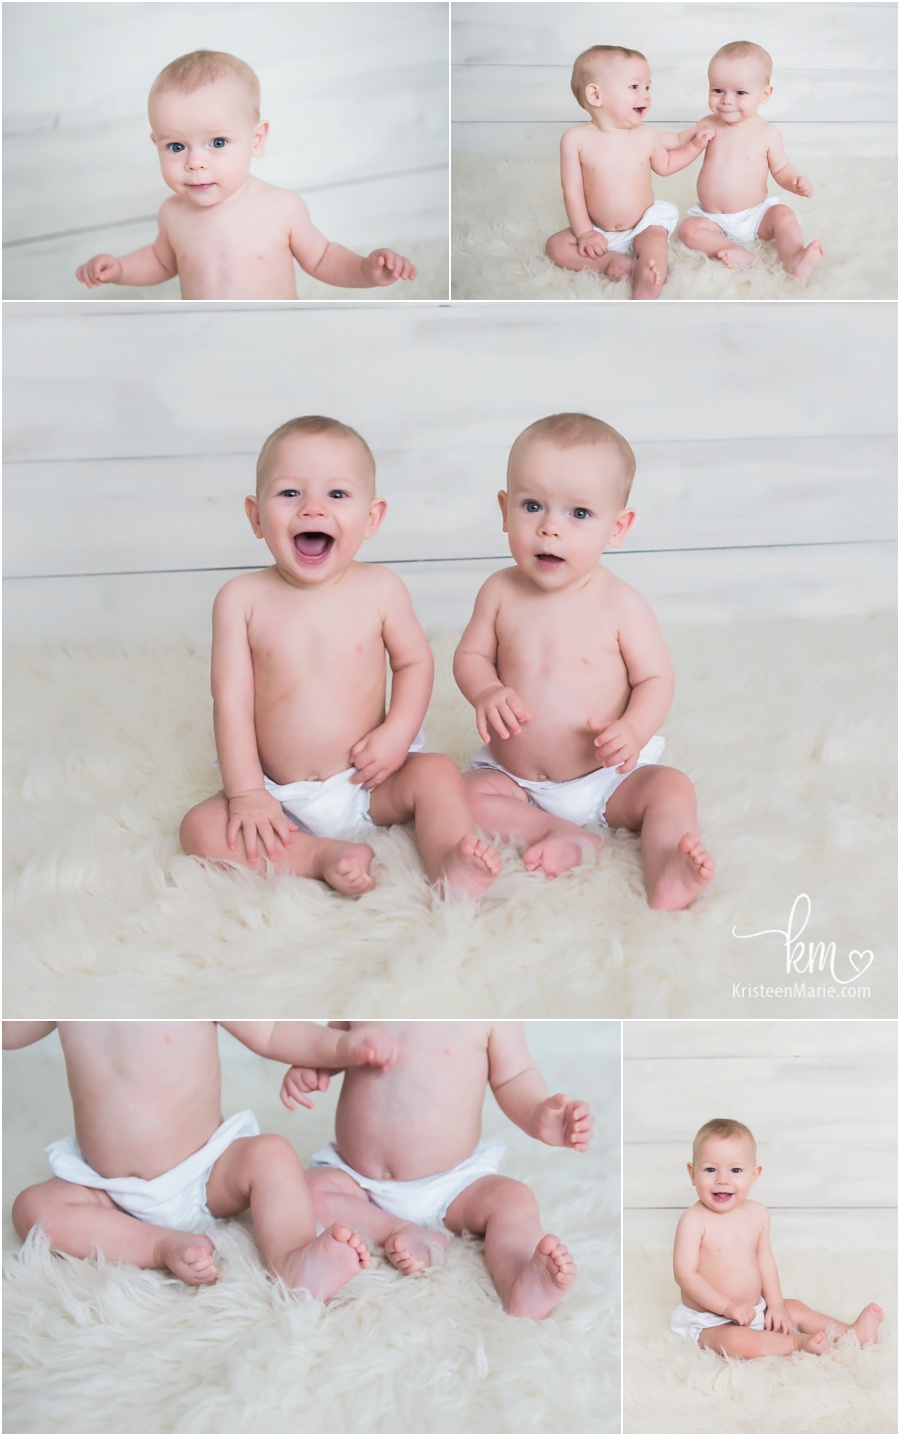 child photography with twins in dipaer covers